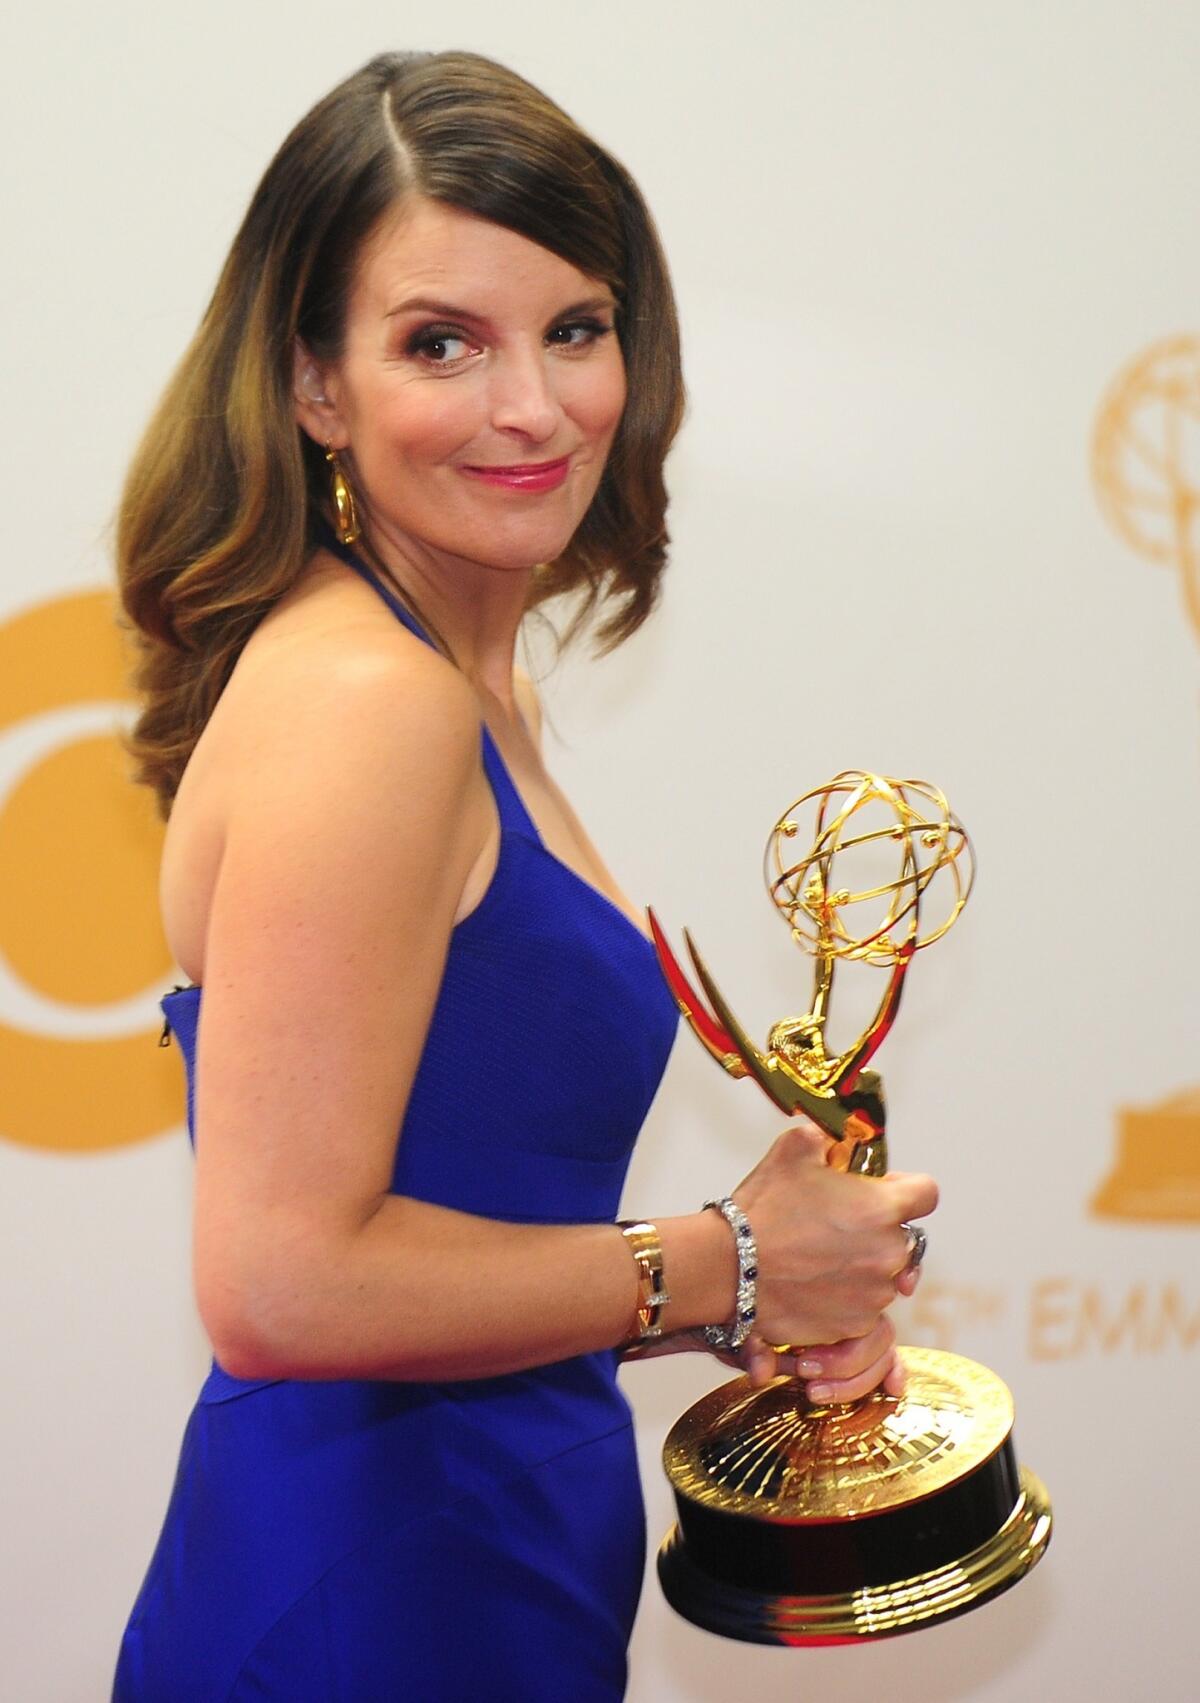 Tina Fey with her Emmy for comedy writing for "30 Rock."